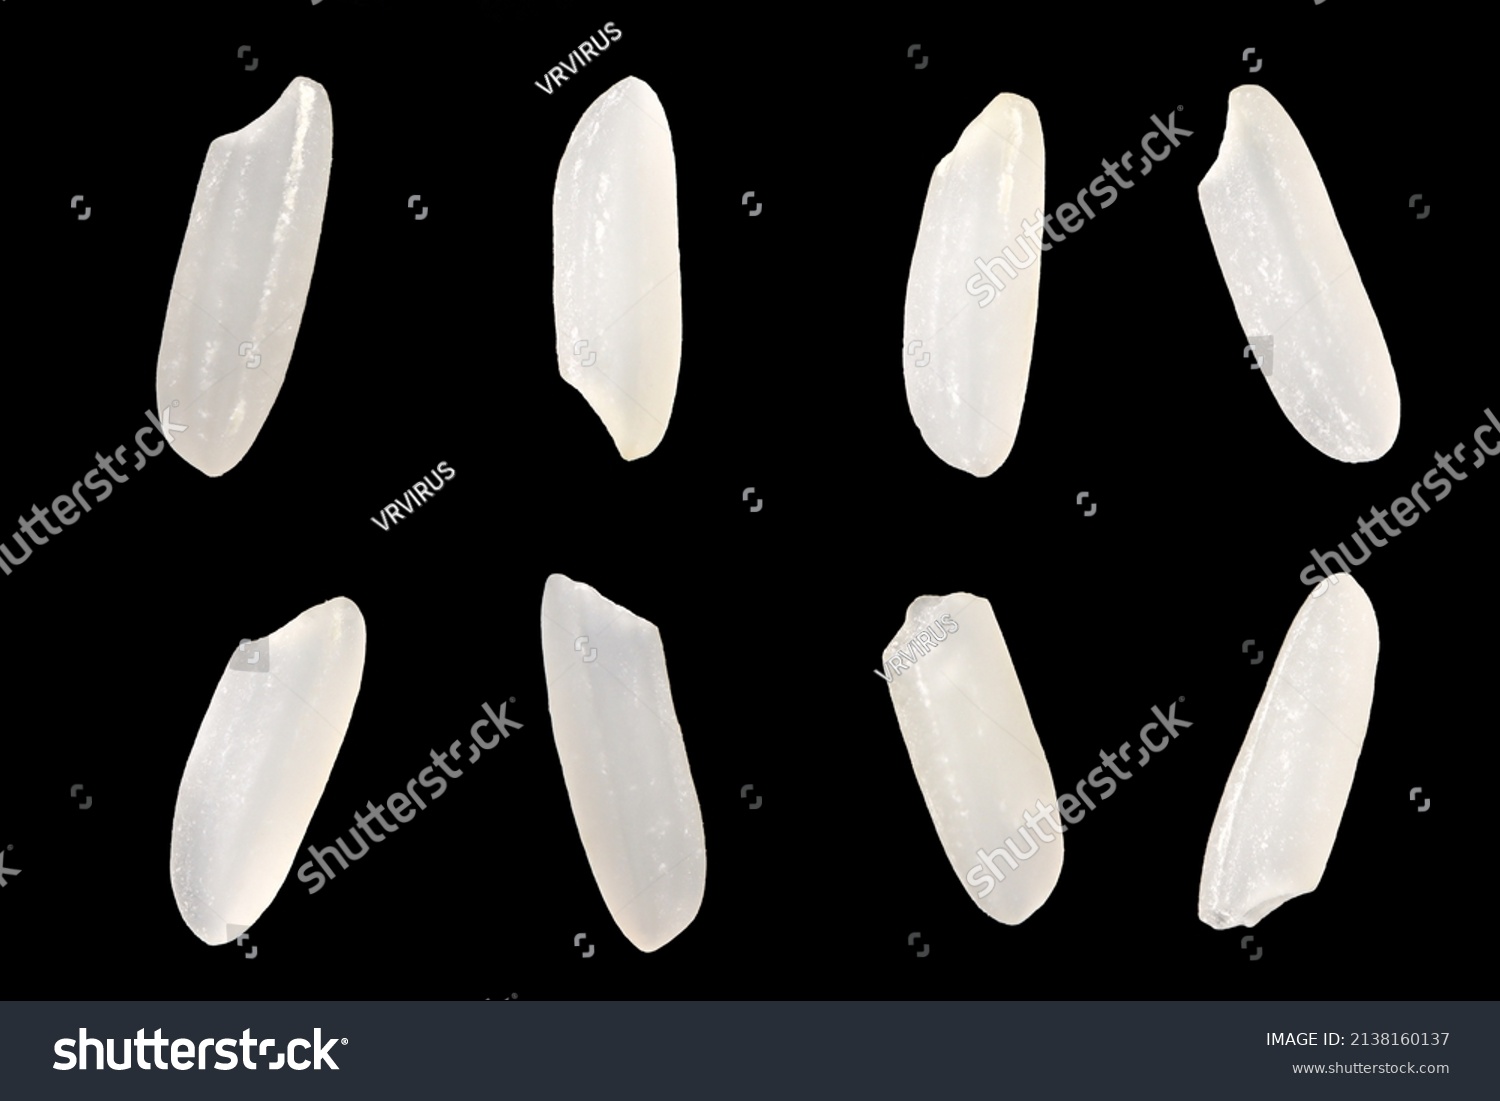 Top view, close-up macro shot. Uncooked long white brown rice grains, lying flat. Isolated on black background. #2138160137